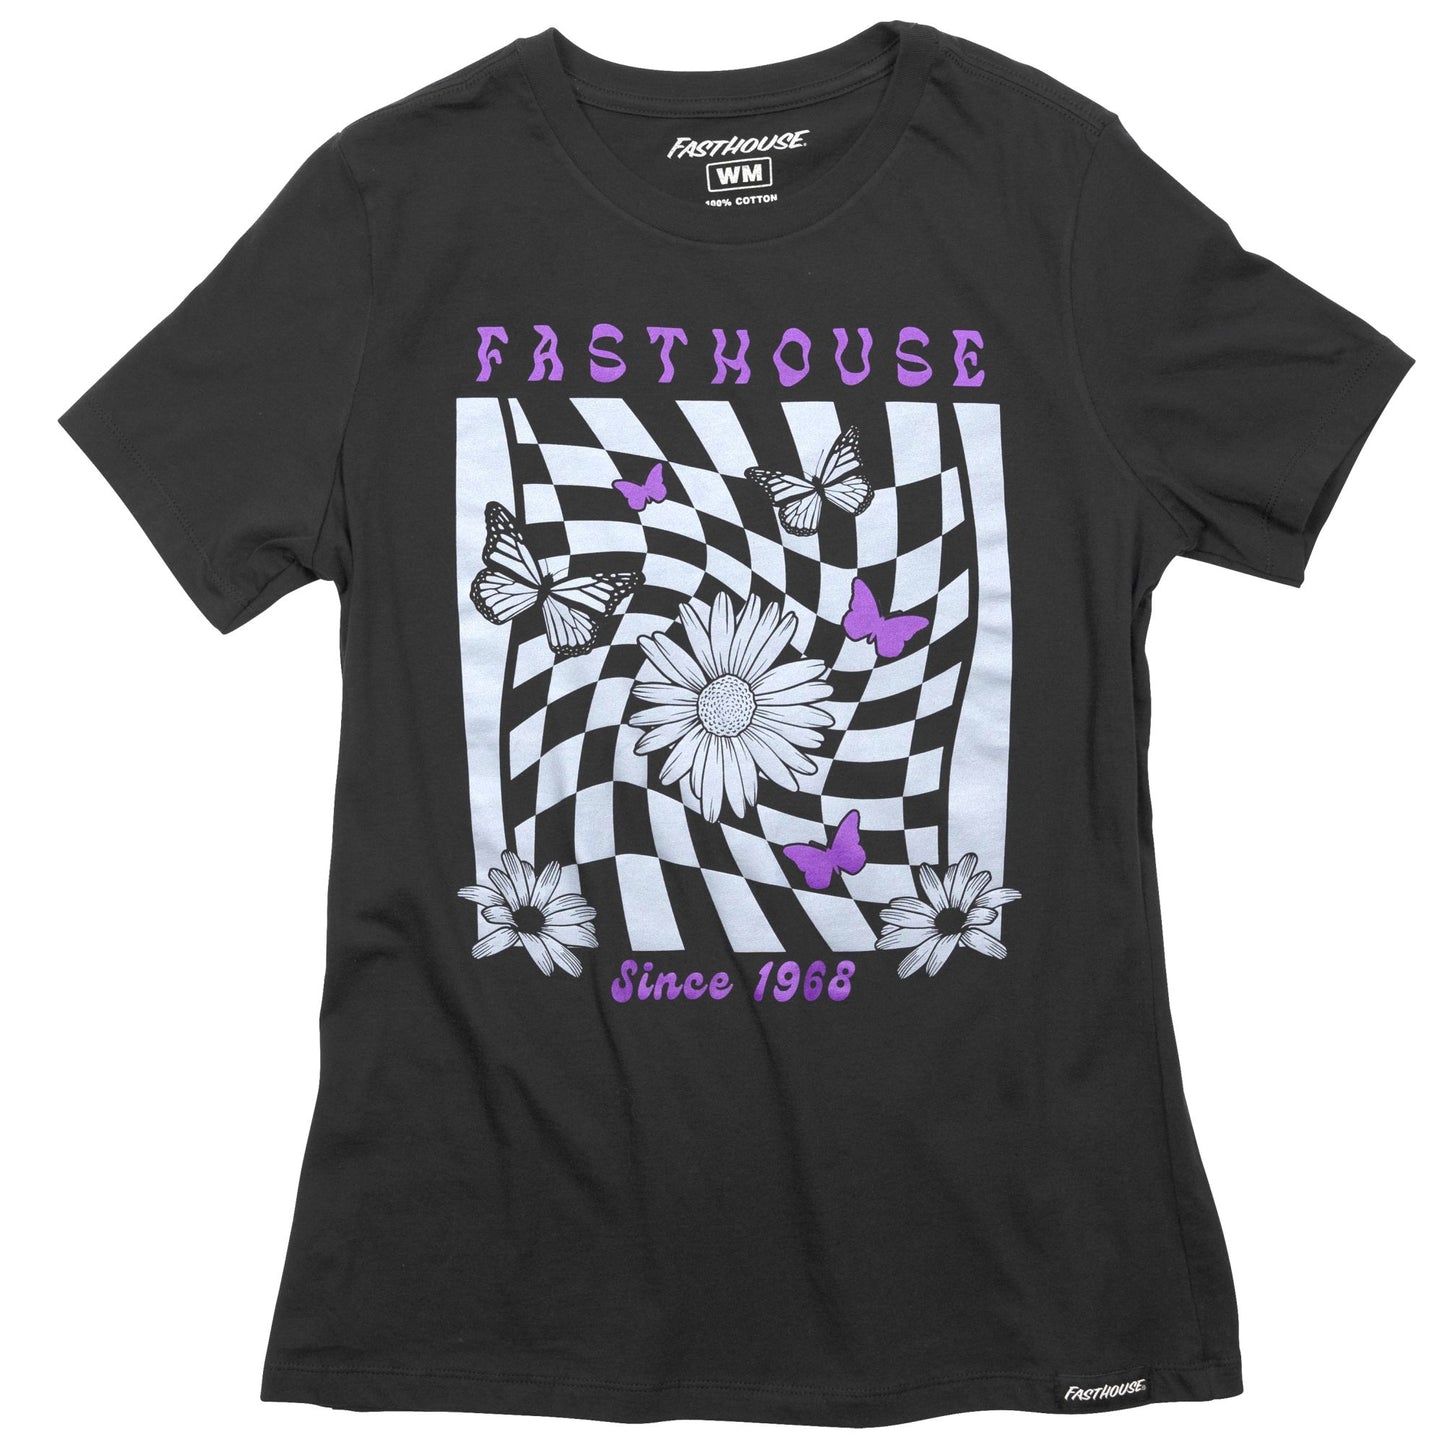 Fasthouse Women's Whirl SS Tee Black Mineral Wash SS Shirts